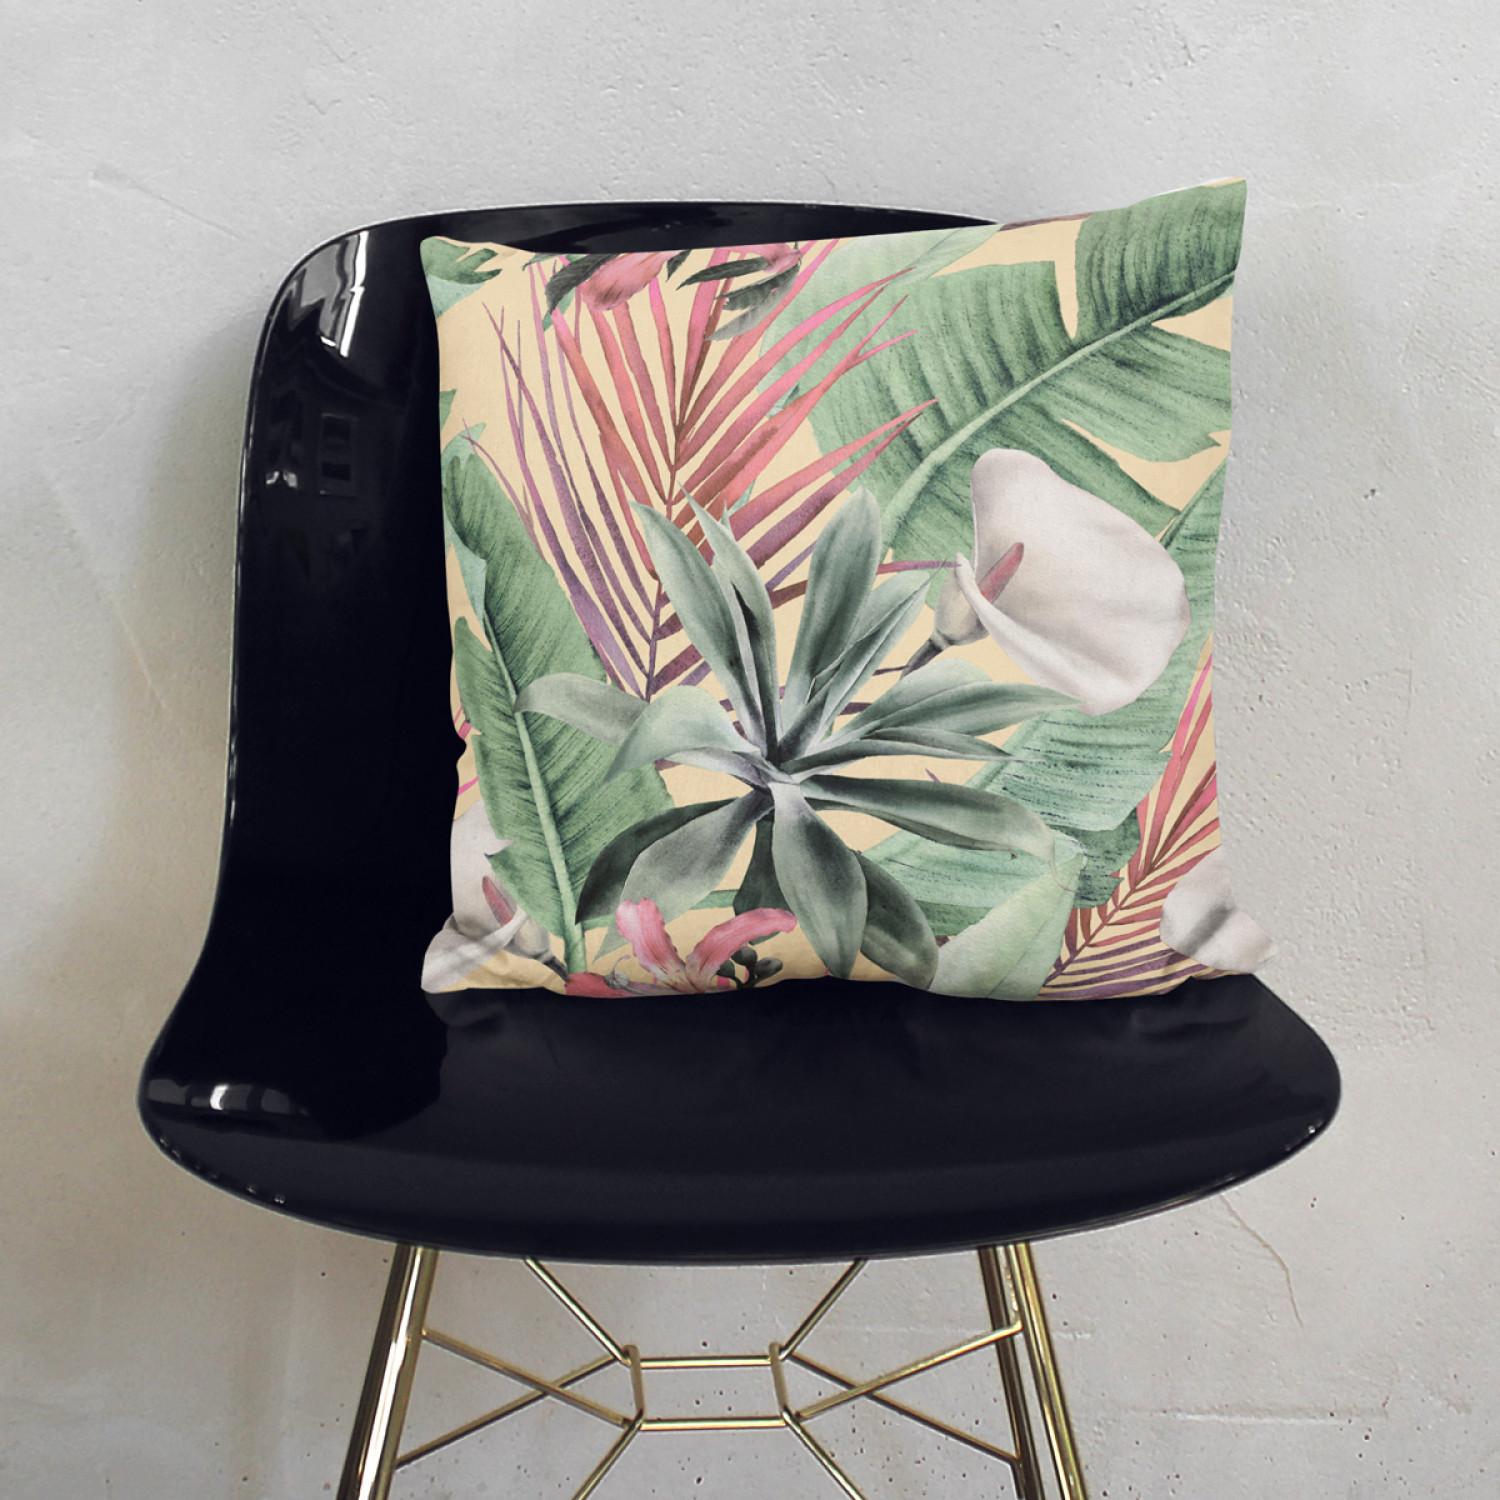 Cojín de microfibra Rainforest flora - a floral pattern with white flowers and leaves cushions